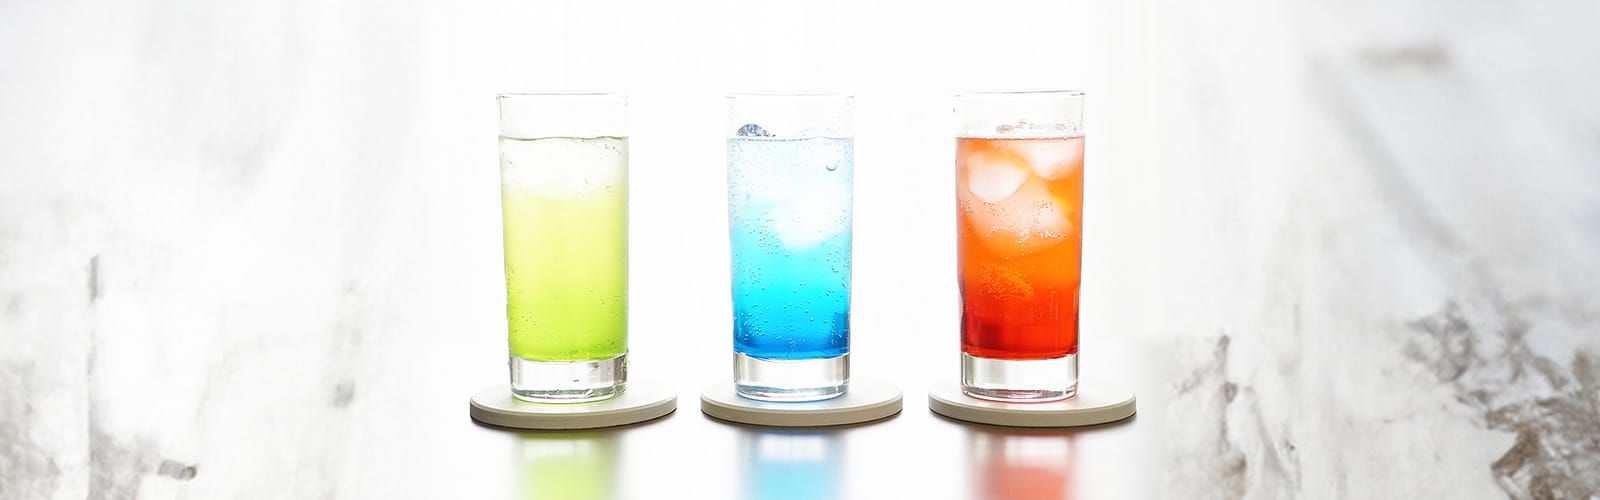 Homemade cocktails in various shades